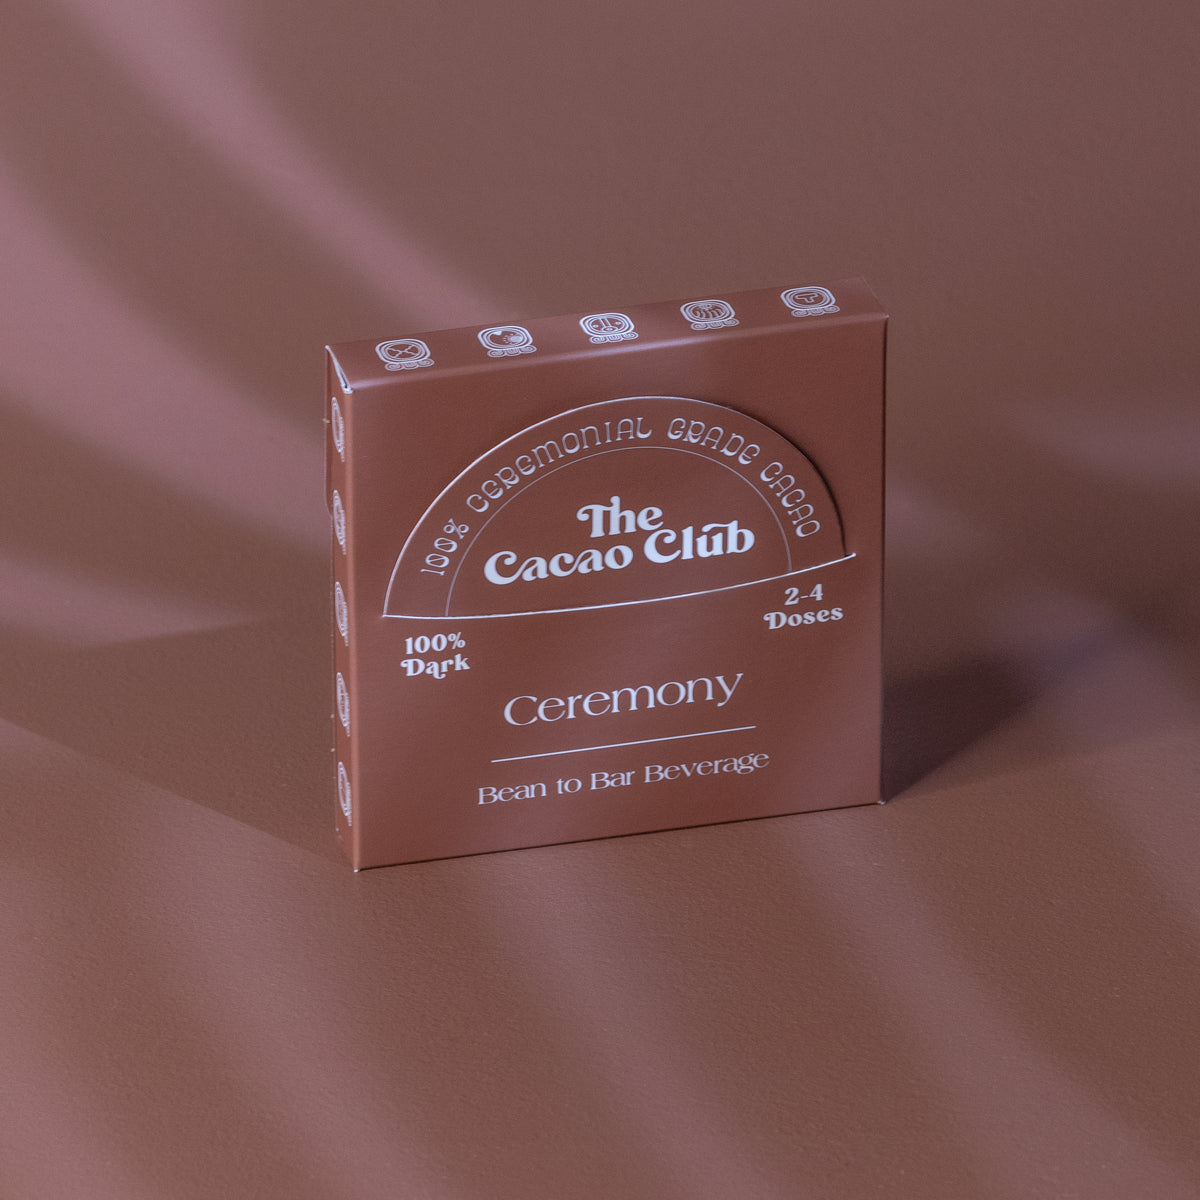 Ceremonial Cacao Ceremony Blend (Hot Cacao Drink) by The Cacao Club